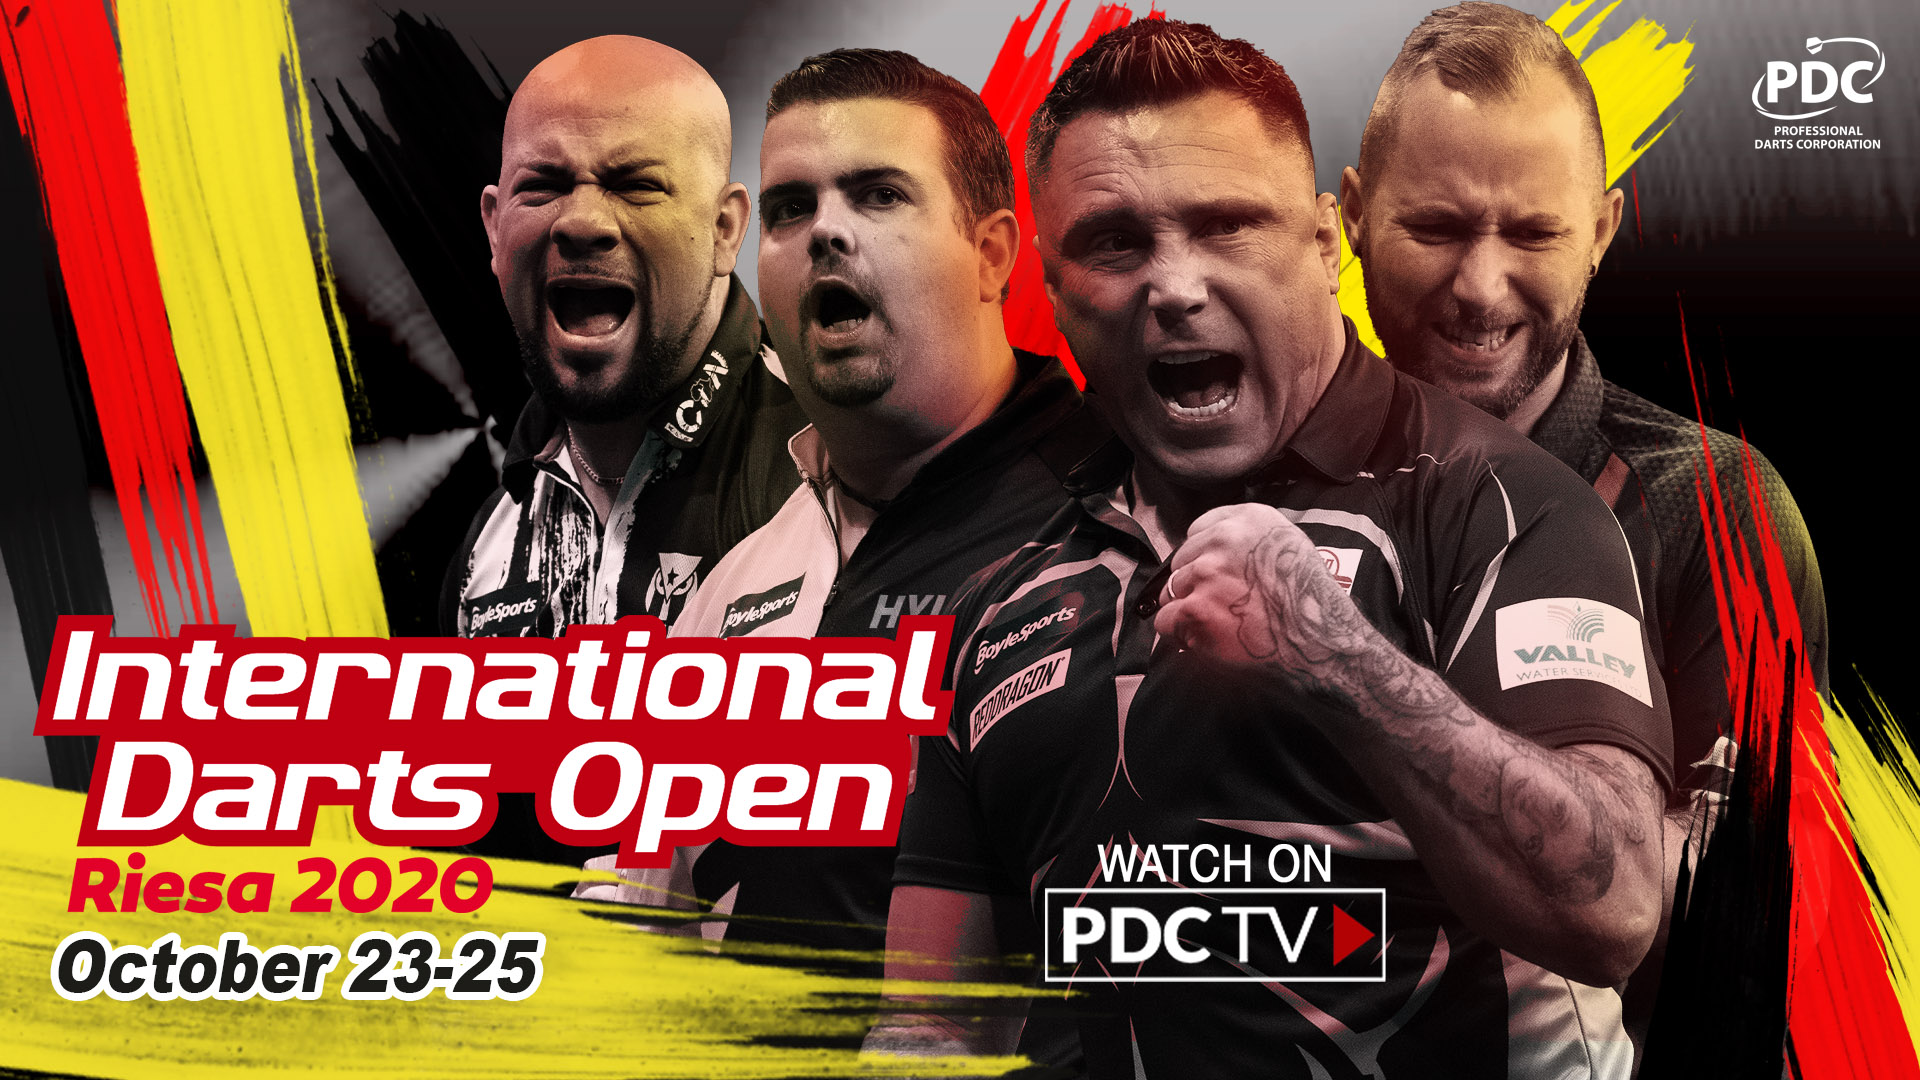 Bidrag se tv Skorpe PDC Darts on Twitter: "The Host Nation Qualifier is drawing to a close in  Riesa where eight places in this weekend's tournament are up for grabs.  Follow live scores, results and stats